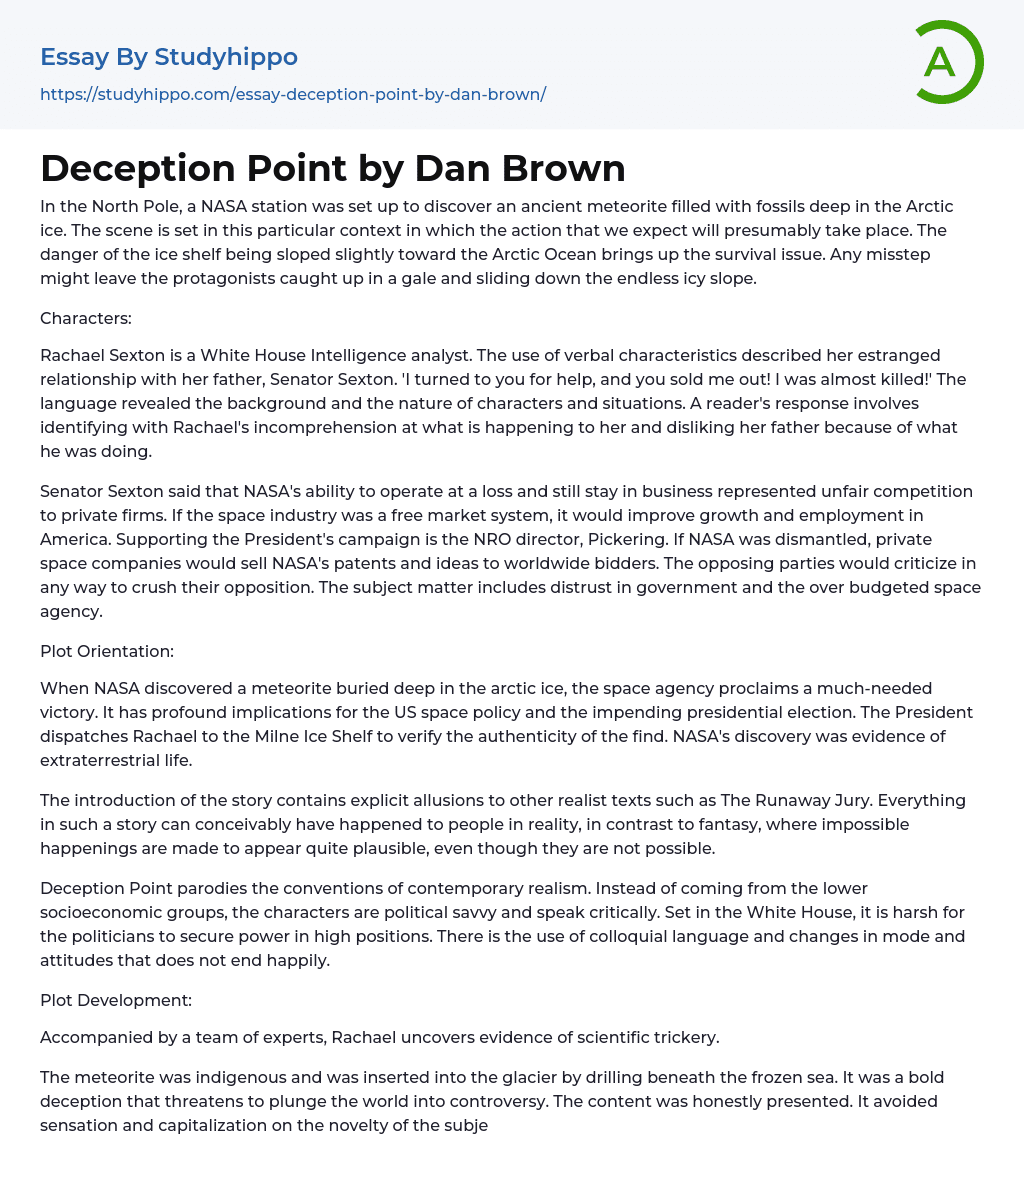 Deception Point by Dan Brown Essay Example